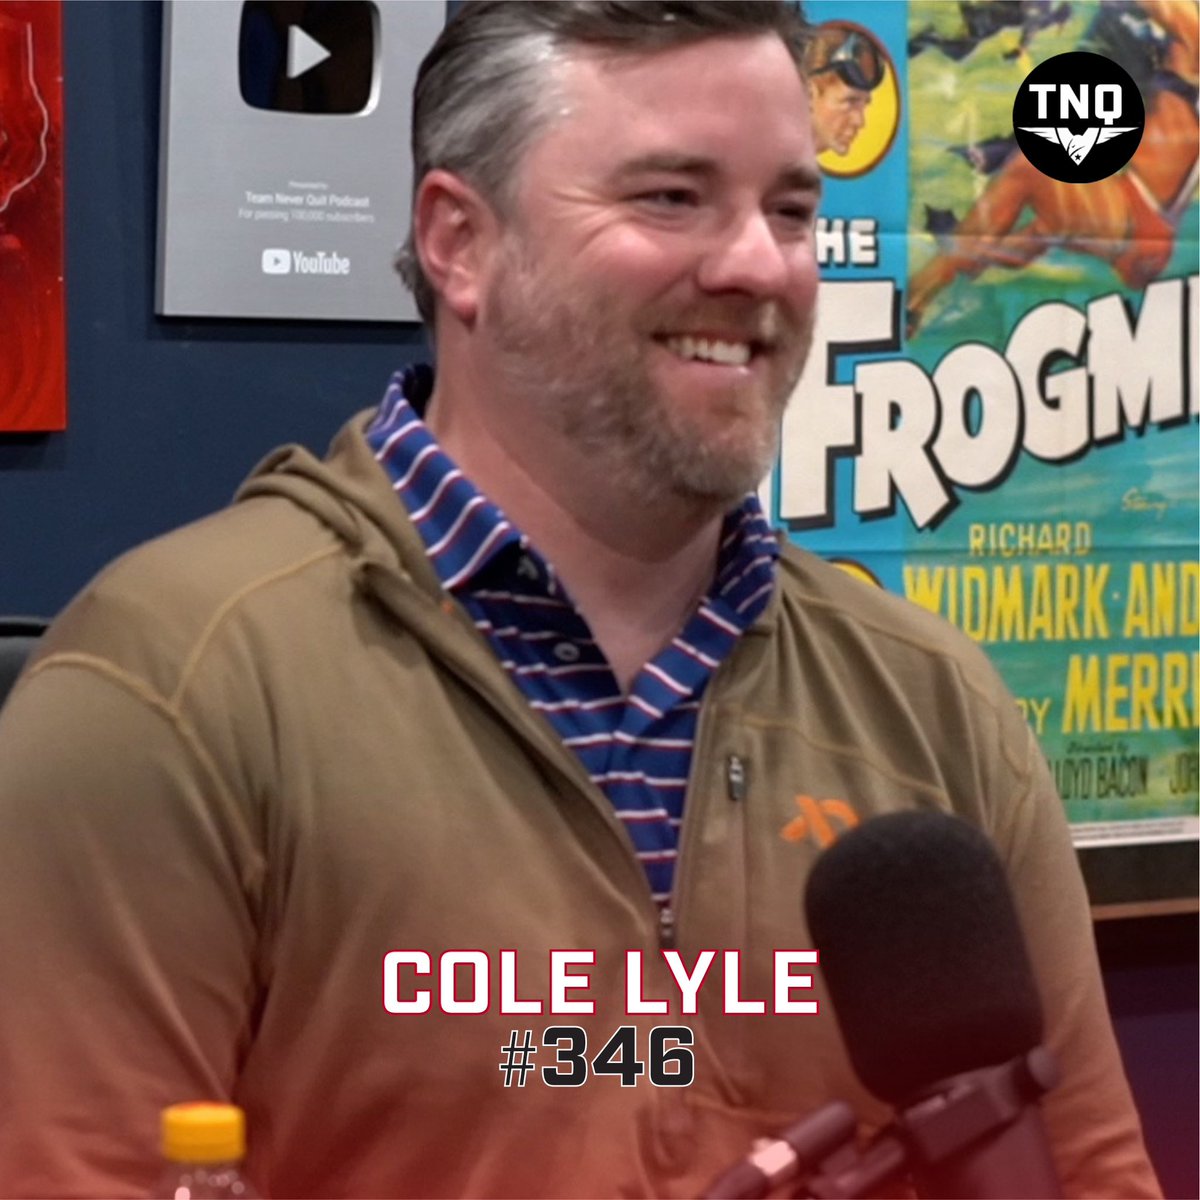 🎙️ New on Team Never Quit Podcast: Cole Lyle discusses Mission Roll Call & the PAWS Act, aiding veterans' well-being. 🇺🇸🐕 🔗 Learn & support: [Mission Roll Call](missionrollcall.org), [K9s Serving Vets](kk9s.org) teamneverquit.com/podcast/cole-l…